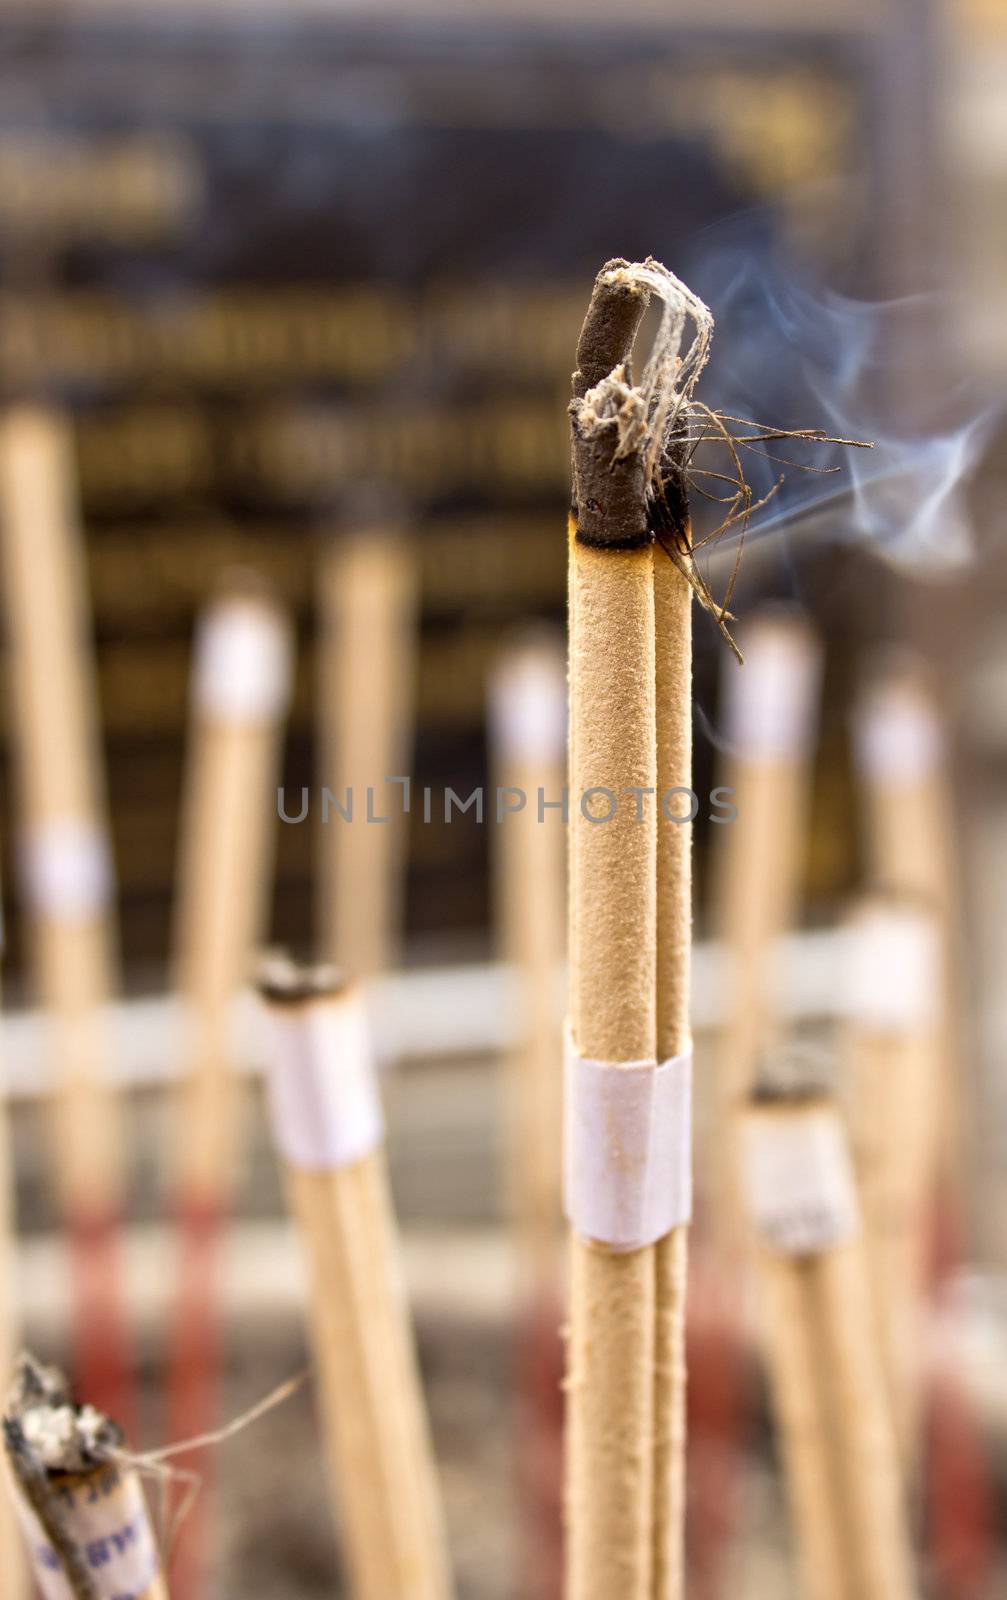 Burning incense sticks at a buddhist temple in thailand